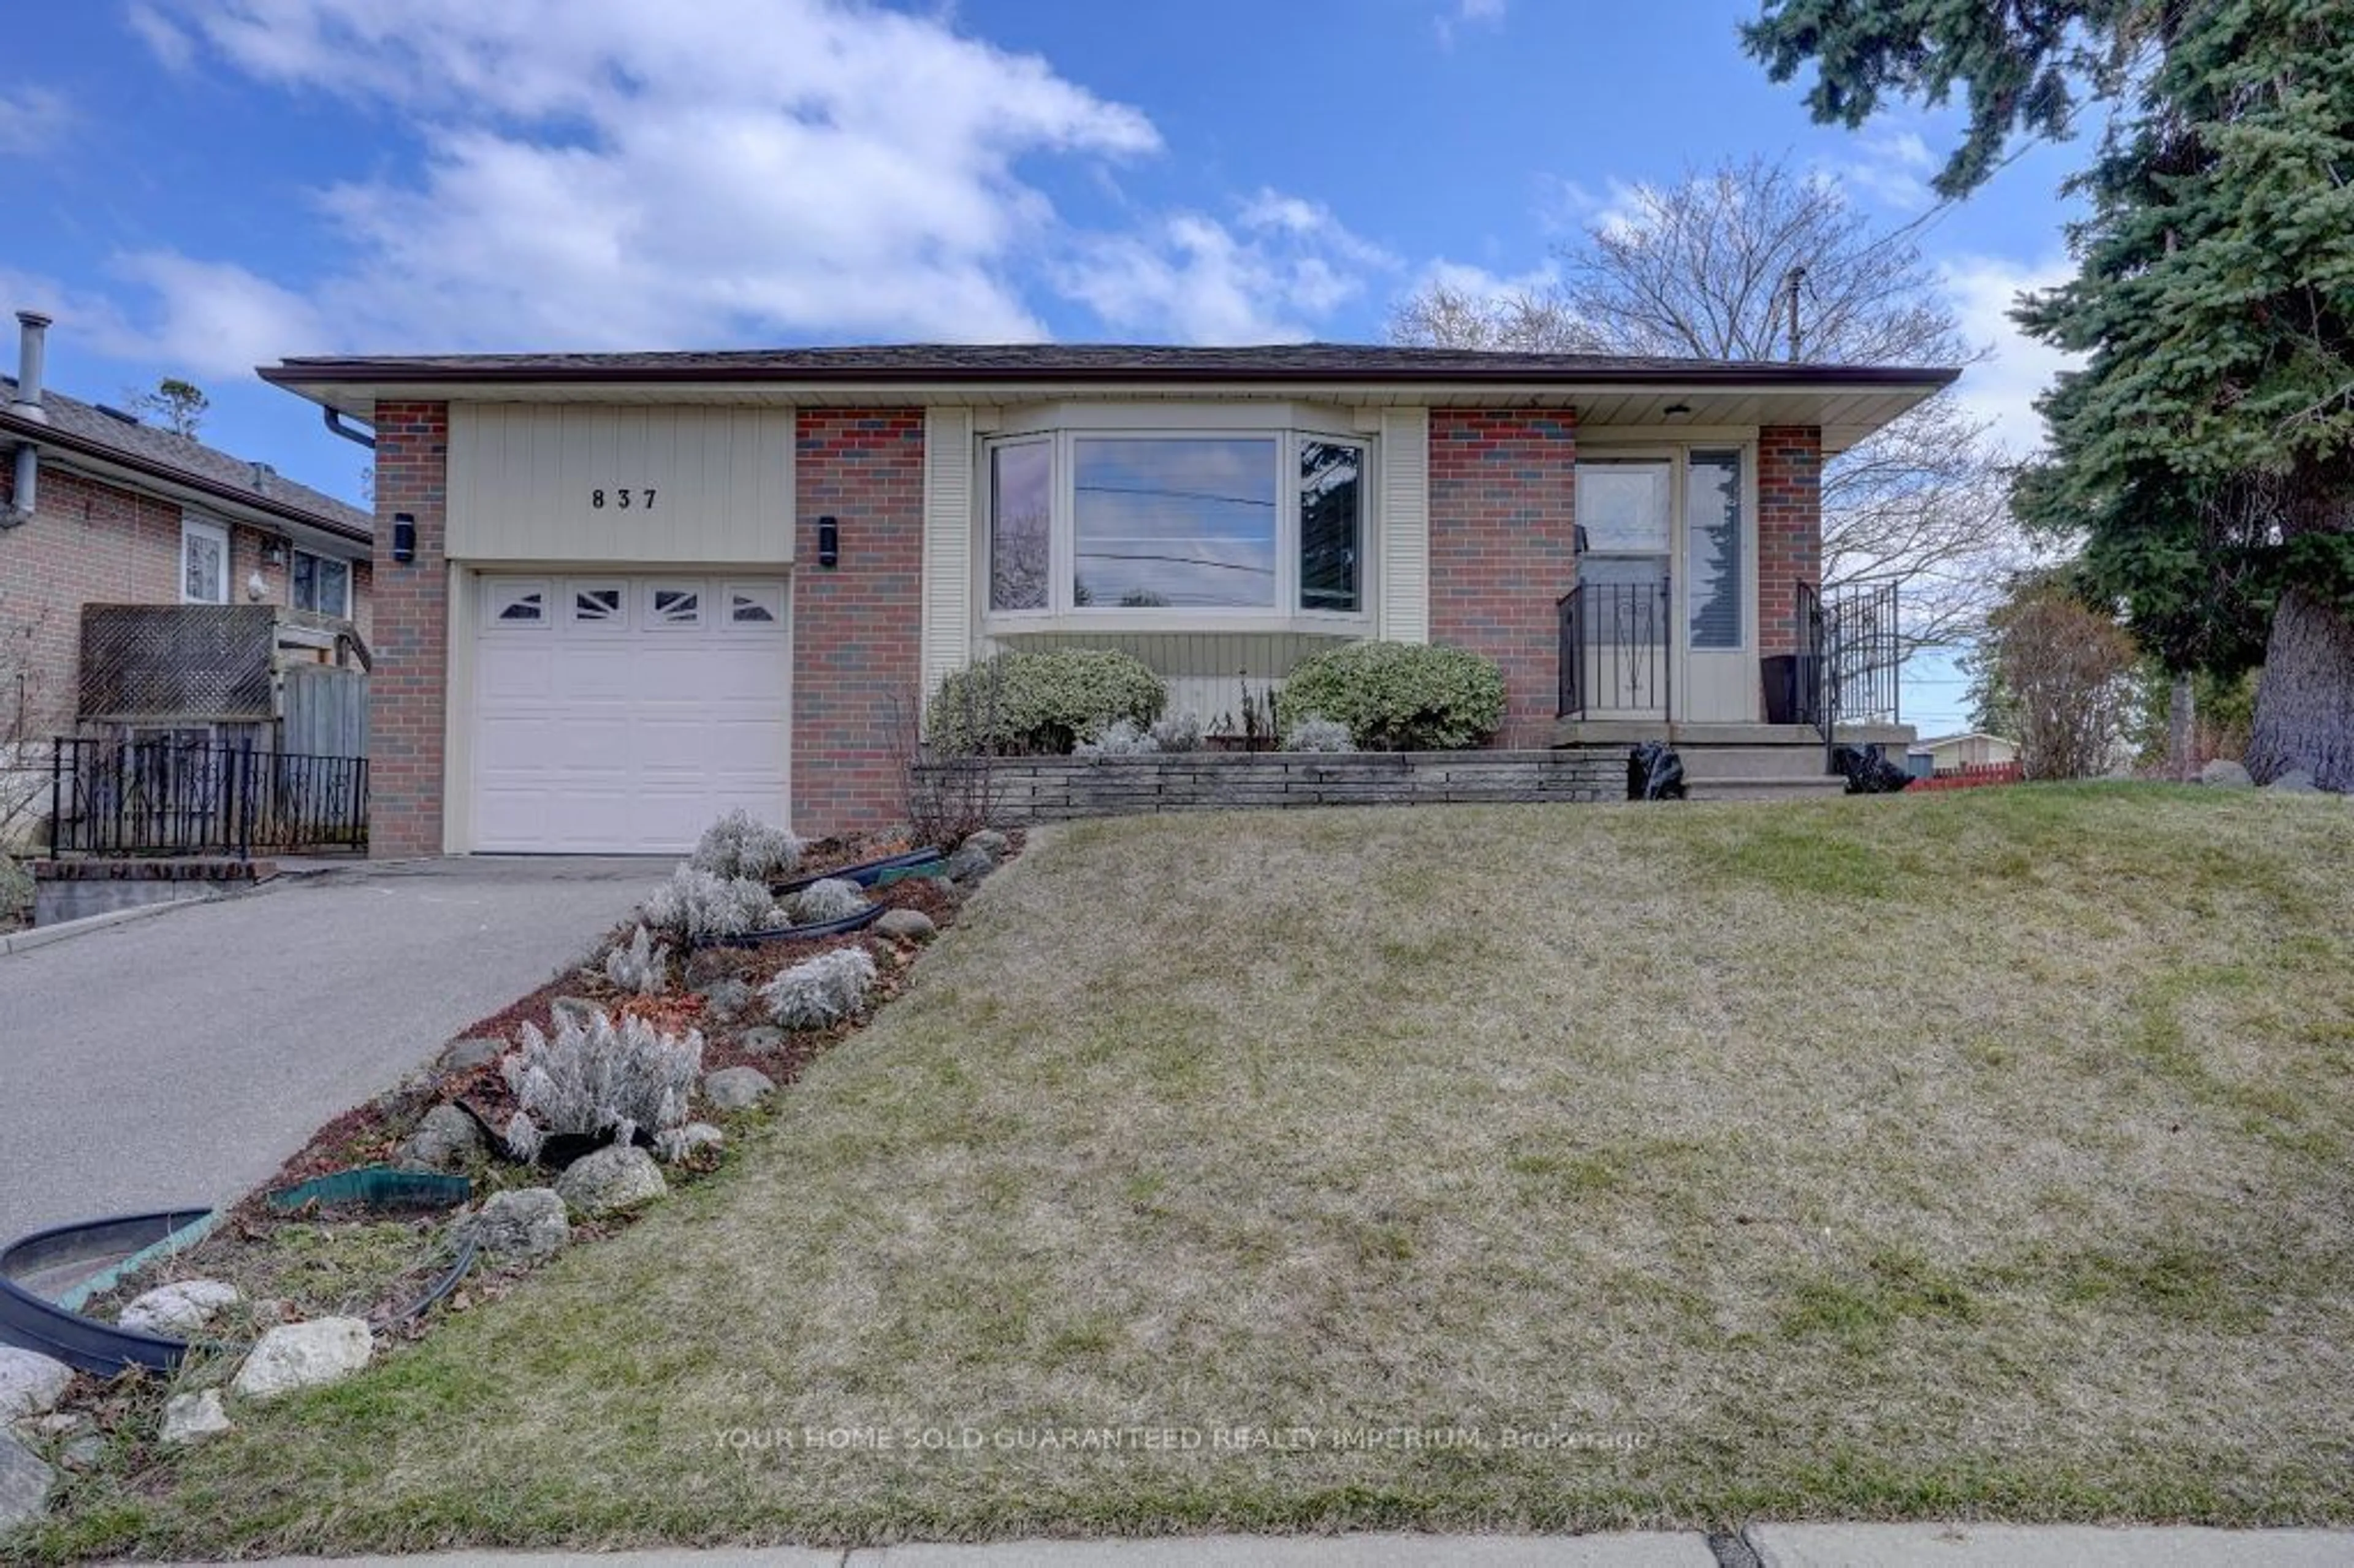 Home with brick exterior material for 837 Hillcrest Rd, Pickering Ontario L1W 2P8